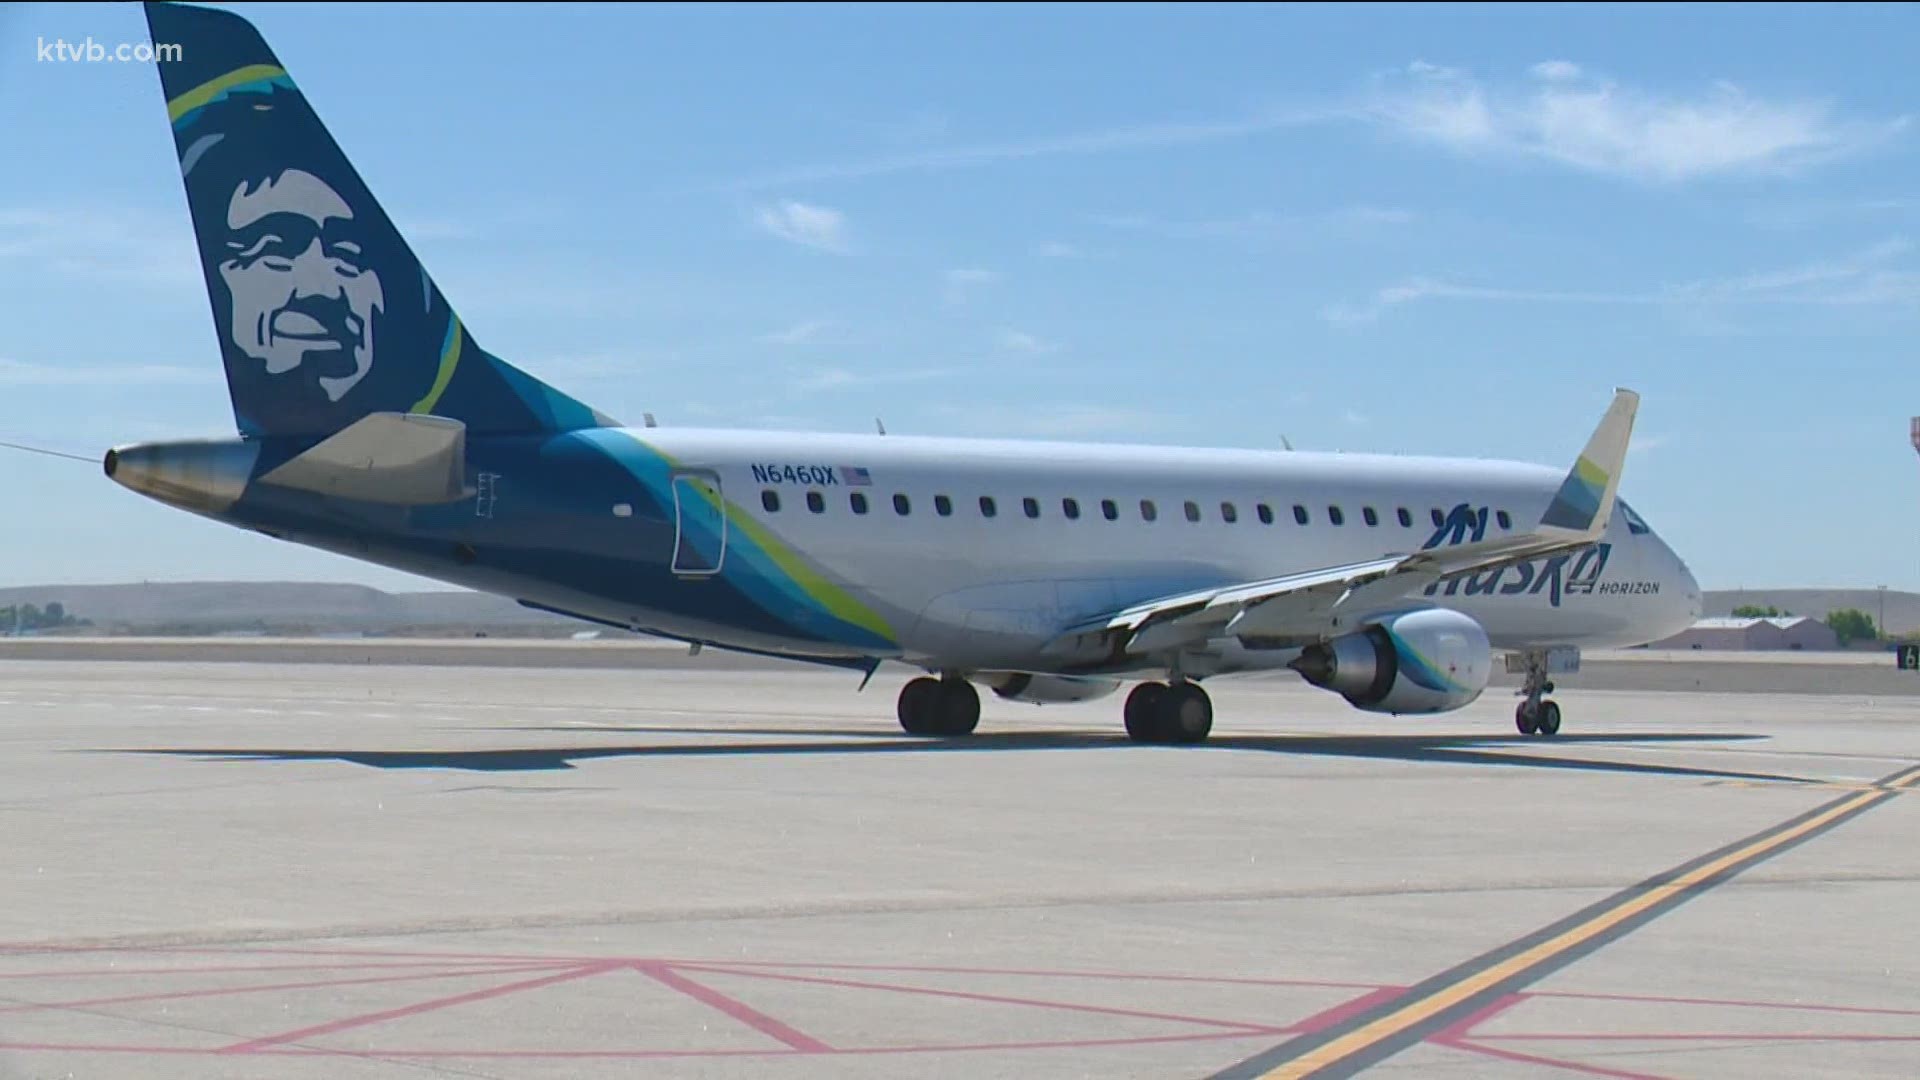 Alaska Airlines on Thursday also announced winter service to Phoenix, and celebrated inaugural flights from Boise to Austin and Chicago.